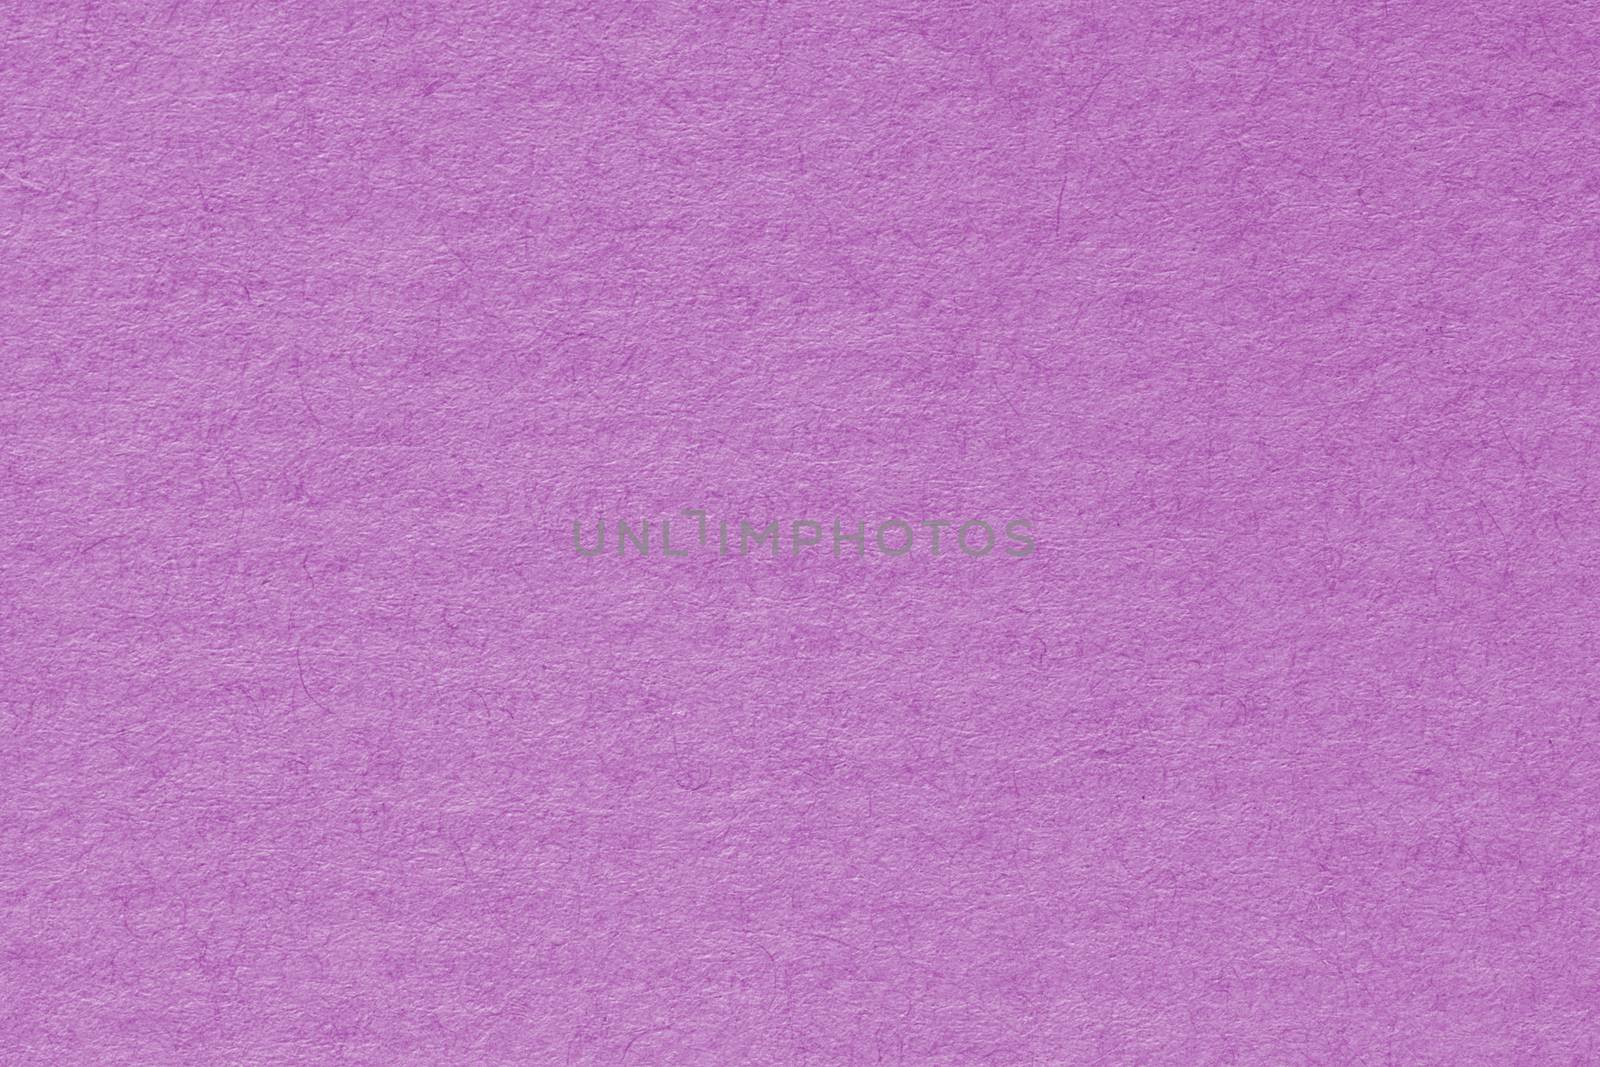 Pink washed paper texture background. Recycled paper texture